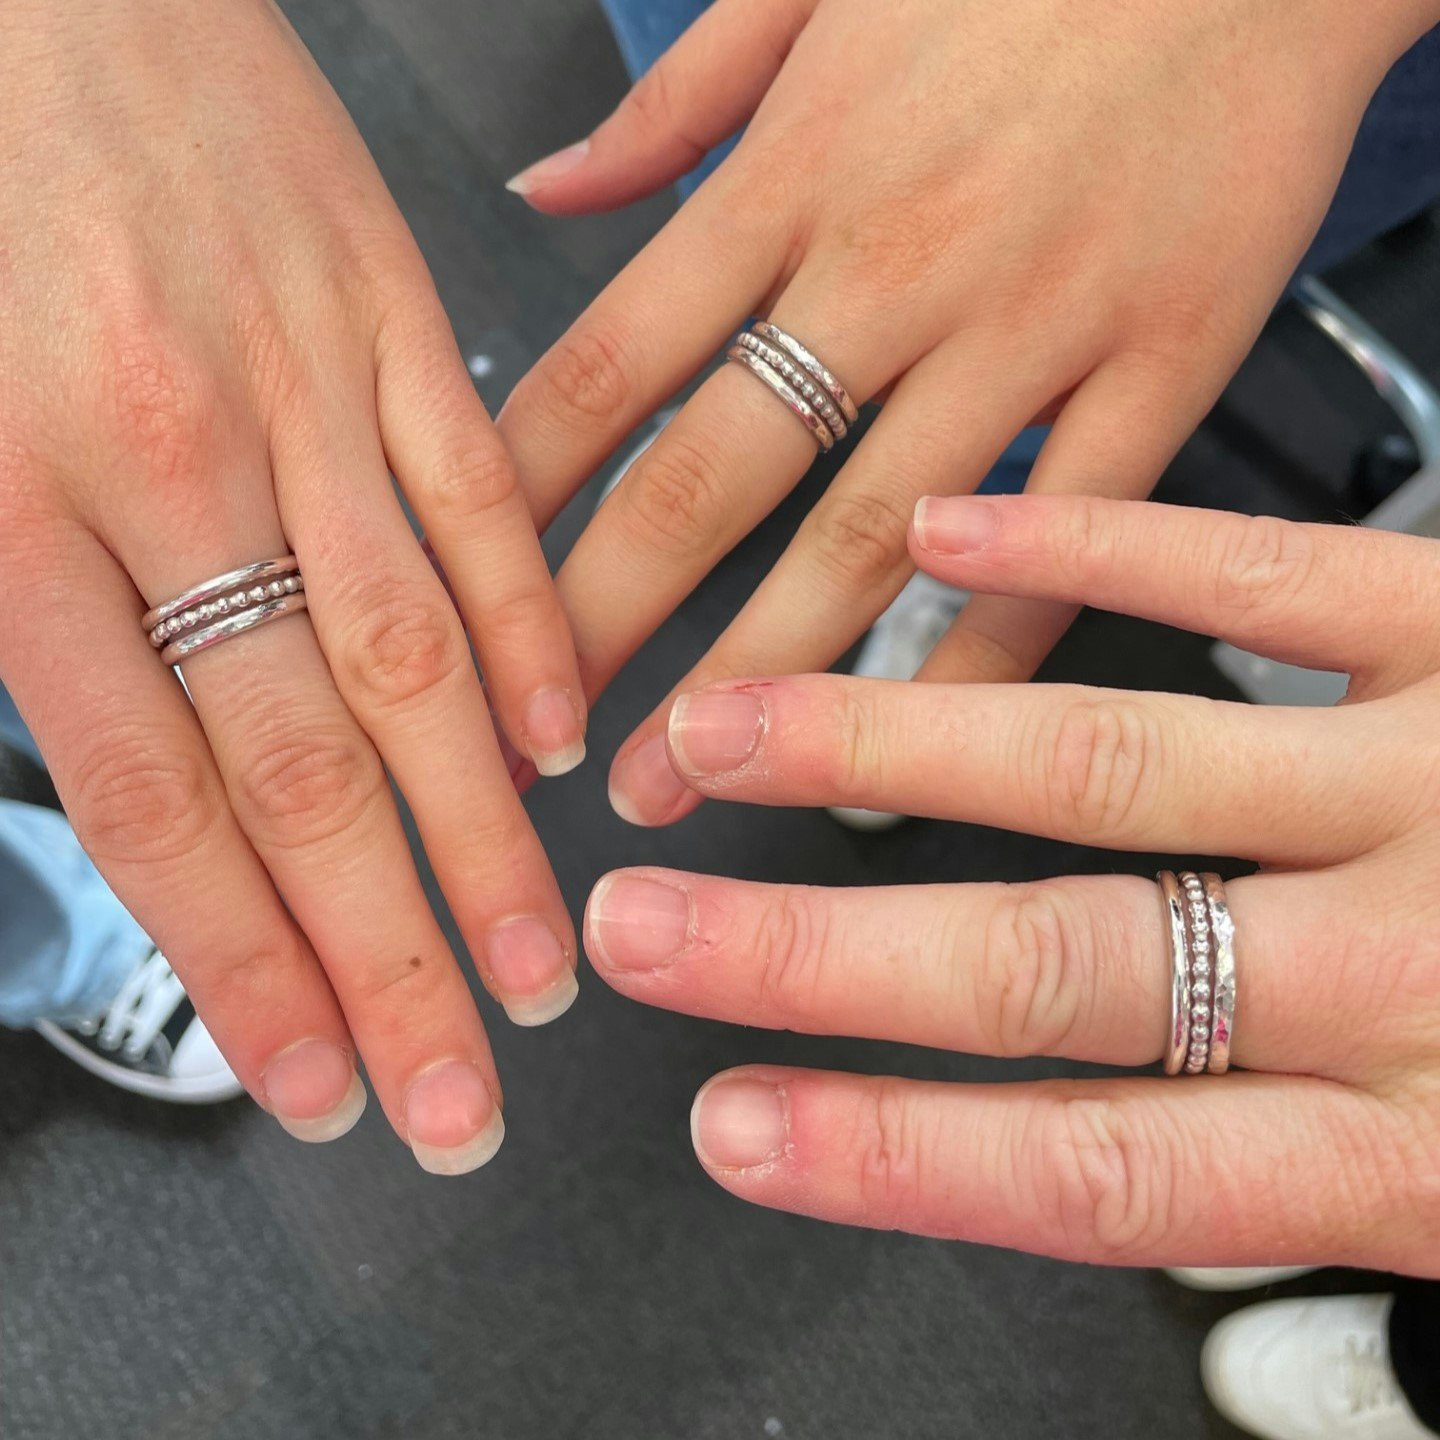 Three hands are in the image, each with a set of three stacking rings on.